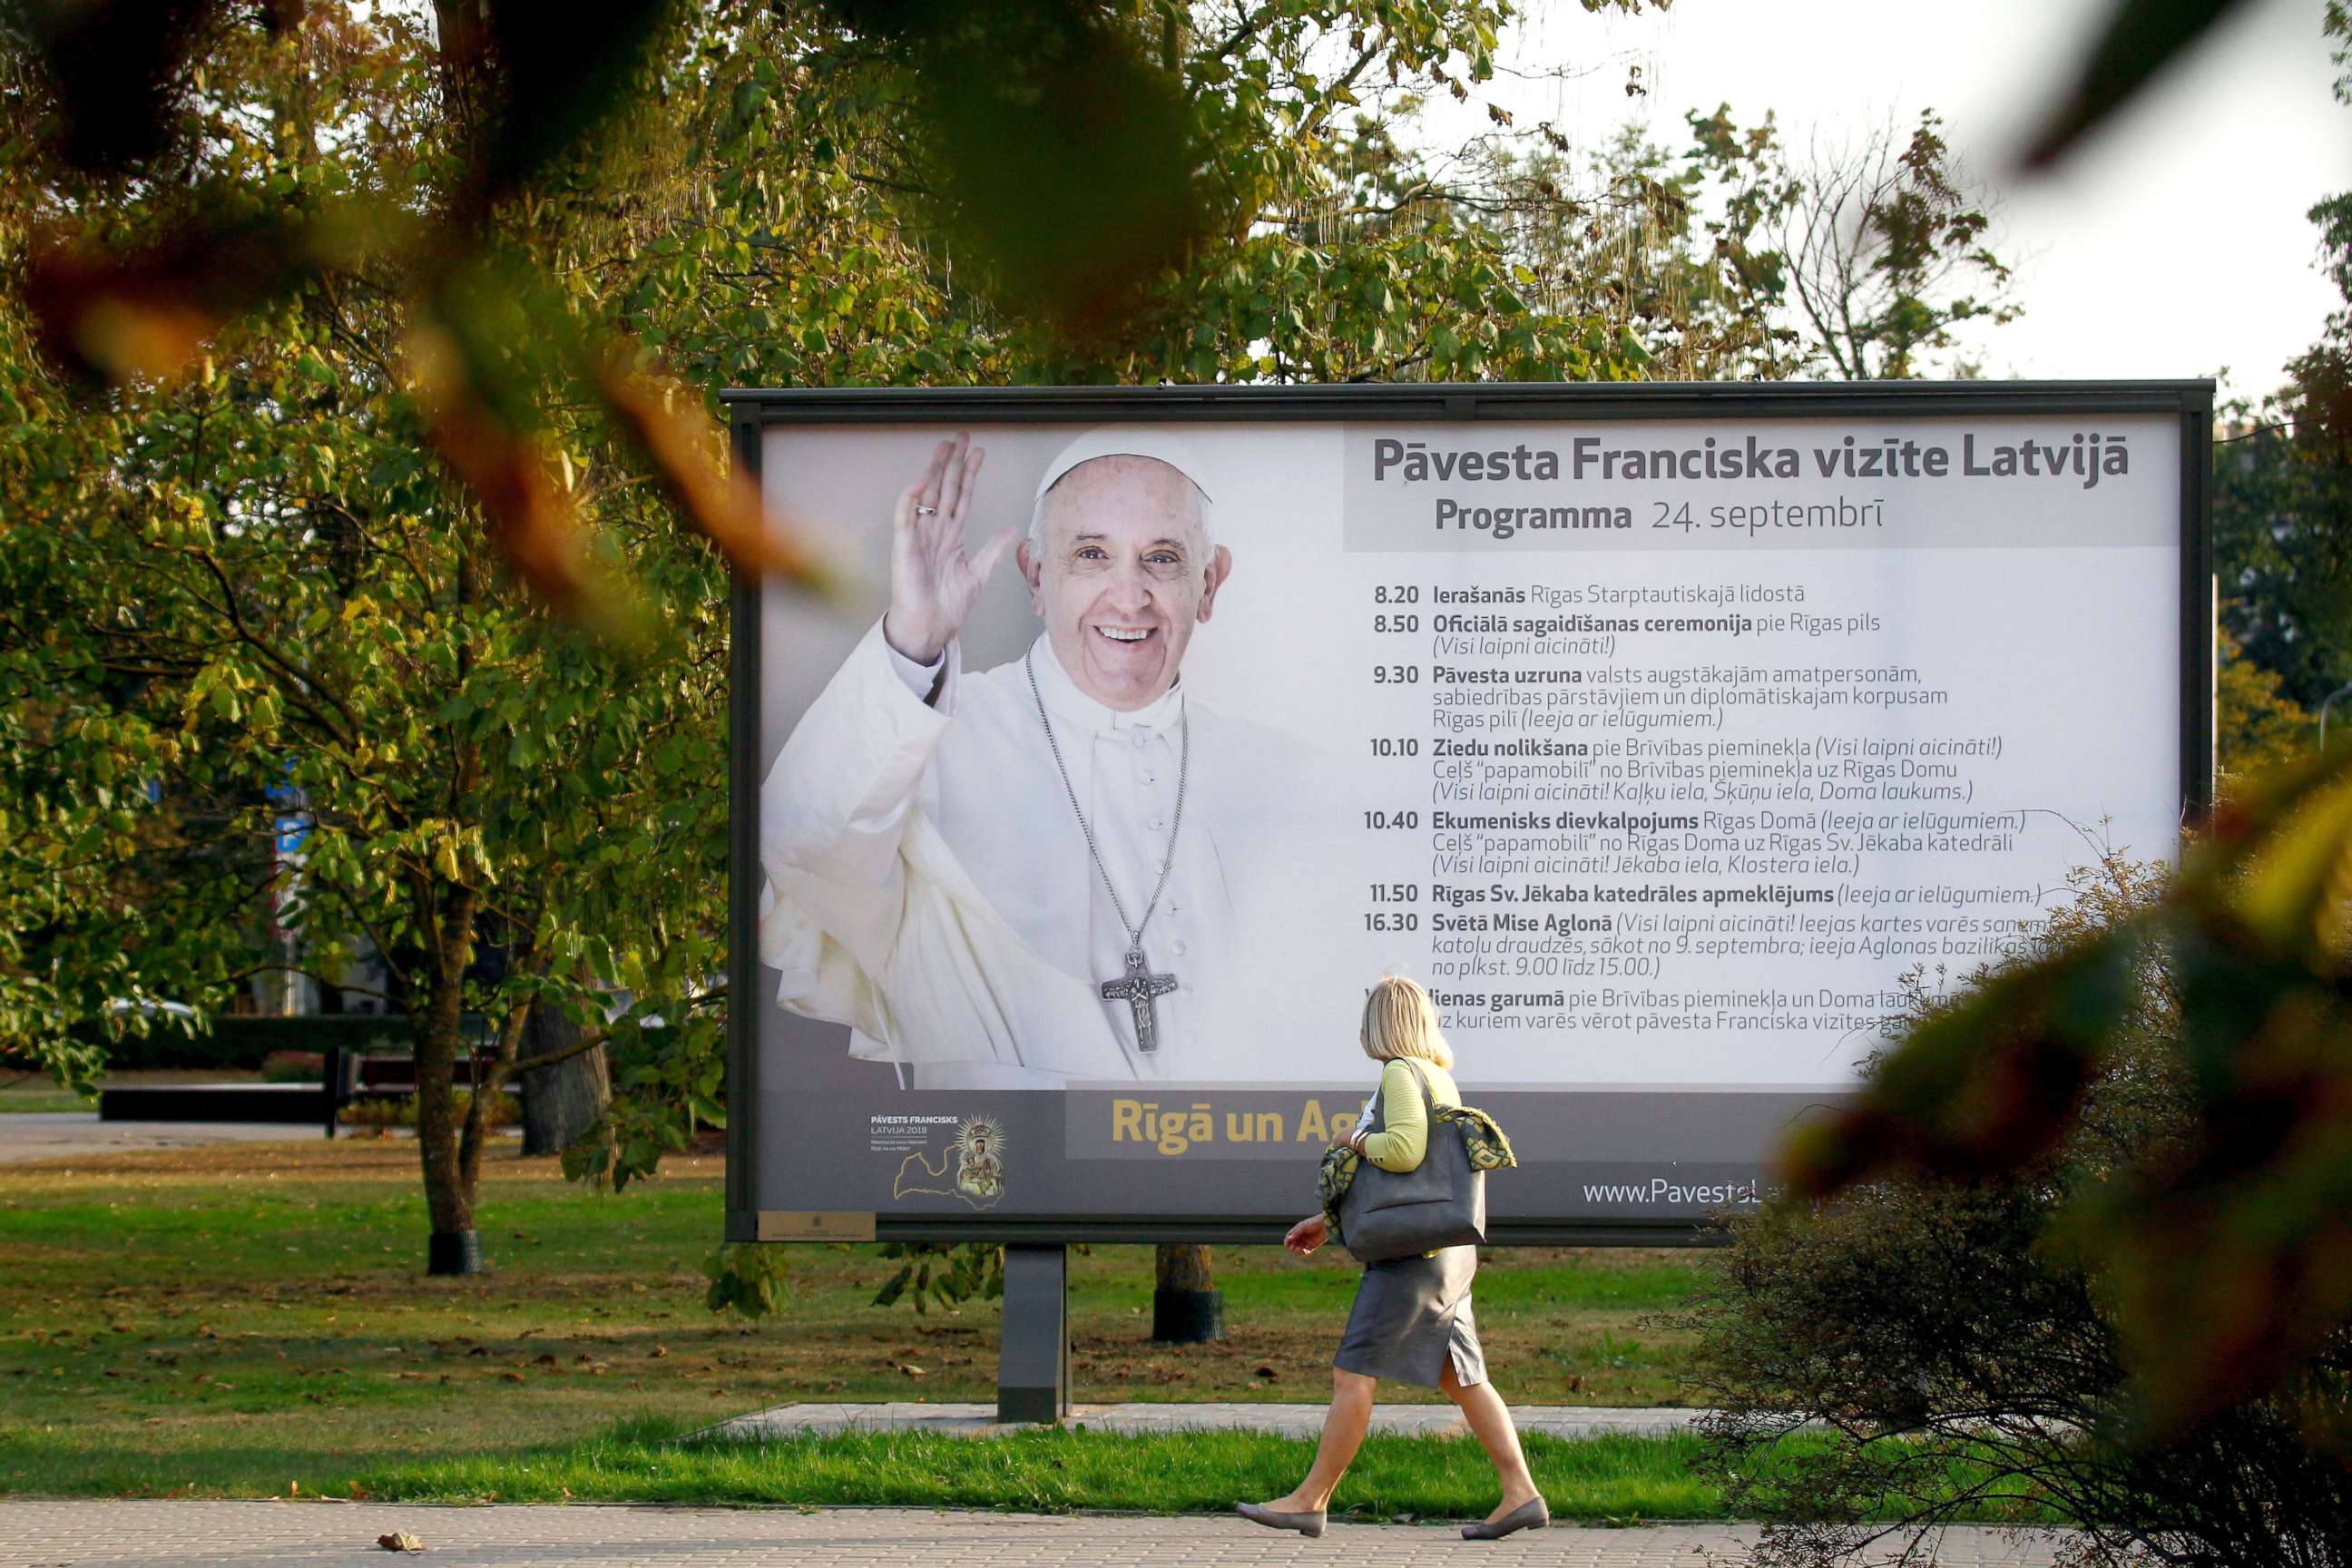 PHOTO: A woman walks next to a billboard advert of Pope Francis upcoming visit to Latvia, in Riga, Latvia, Sept. 20, 2018.